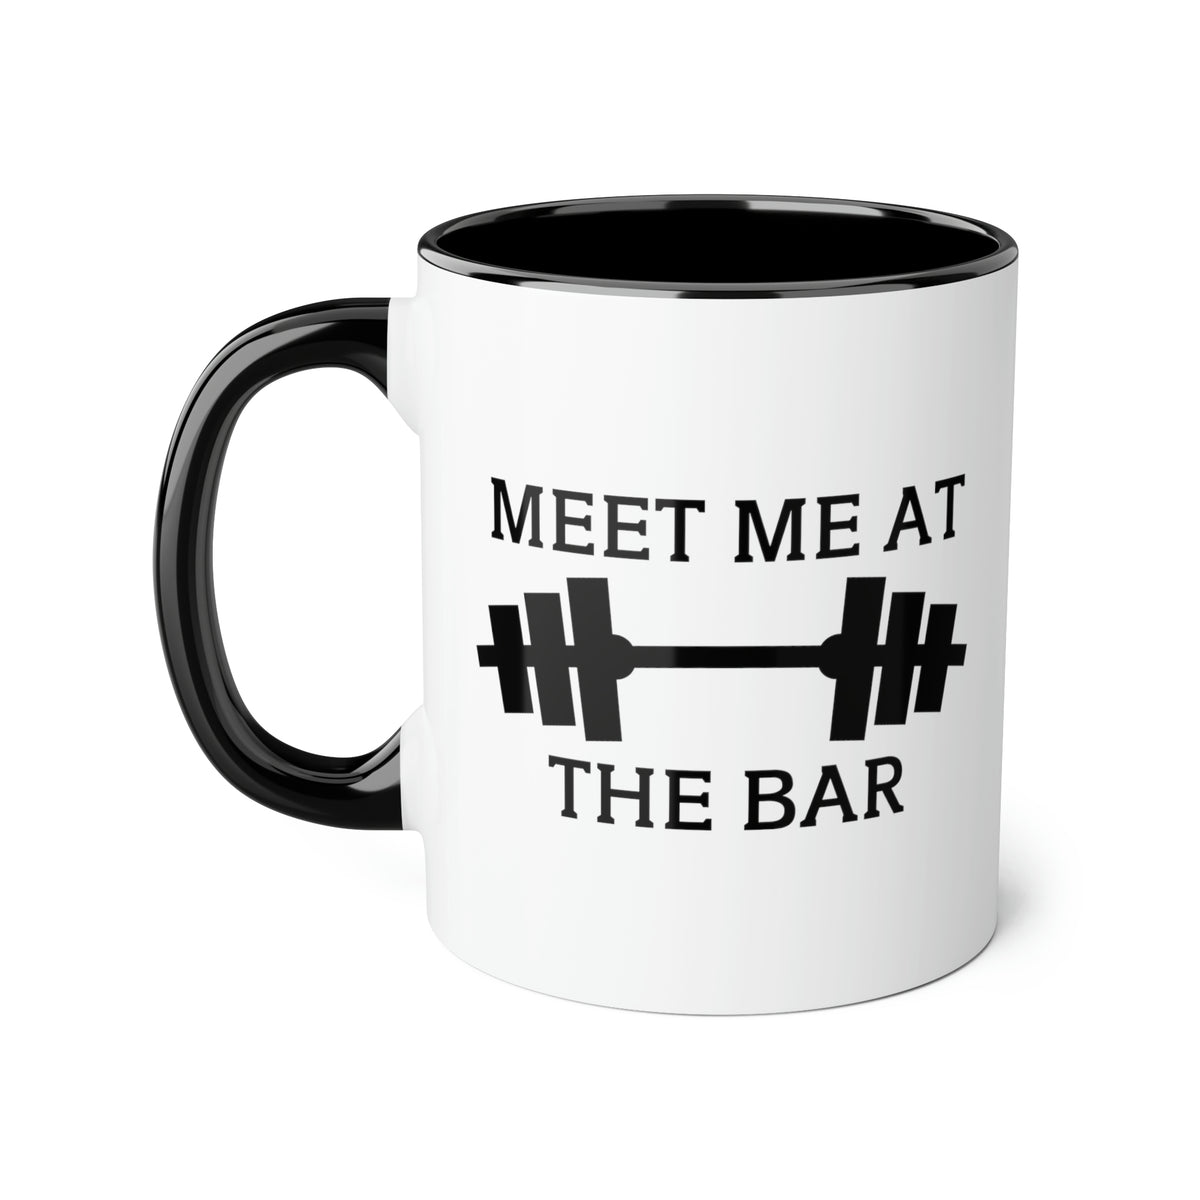 Personal Trainer Gifts - Meet Me At The Bar Two Tone Coffee Mug - Gifts For Athletic Trainer Fitness Trainer Men Women